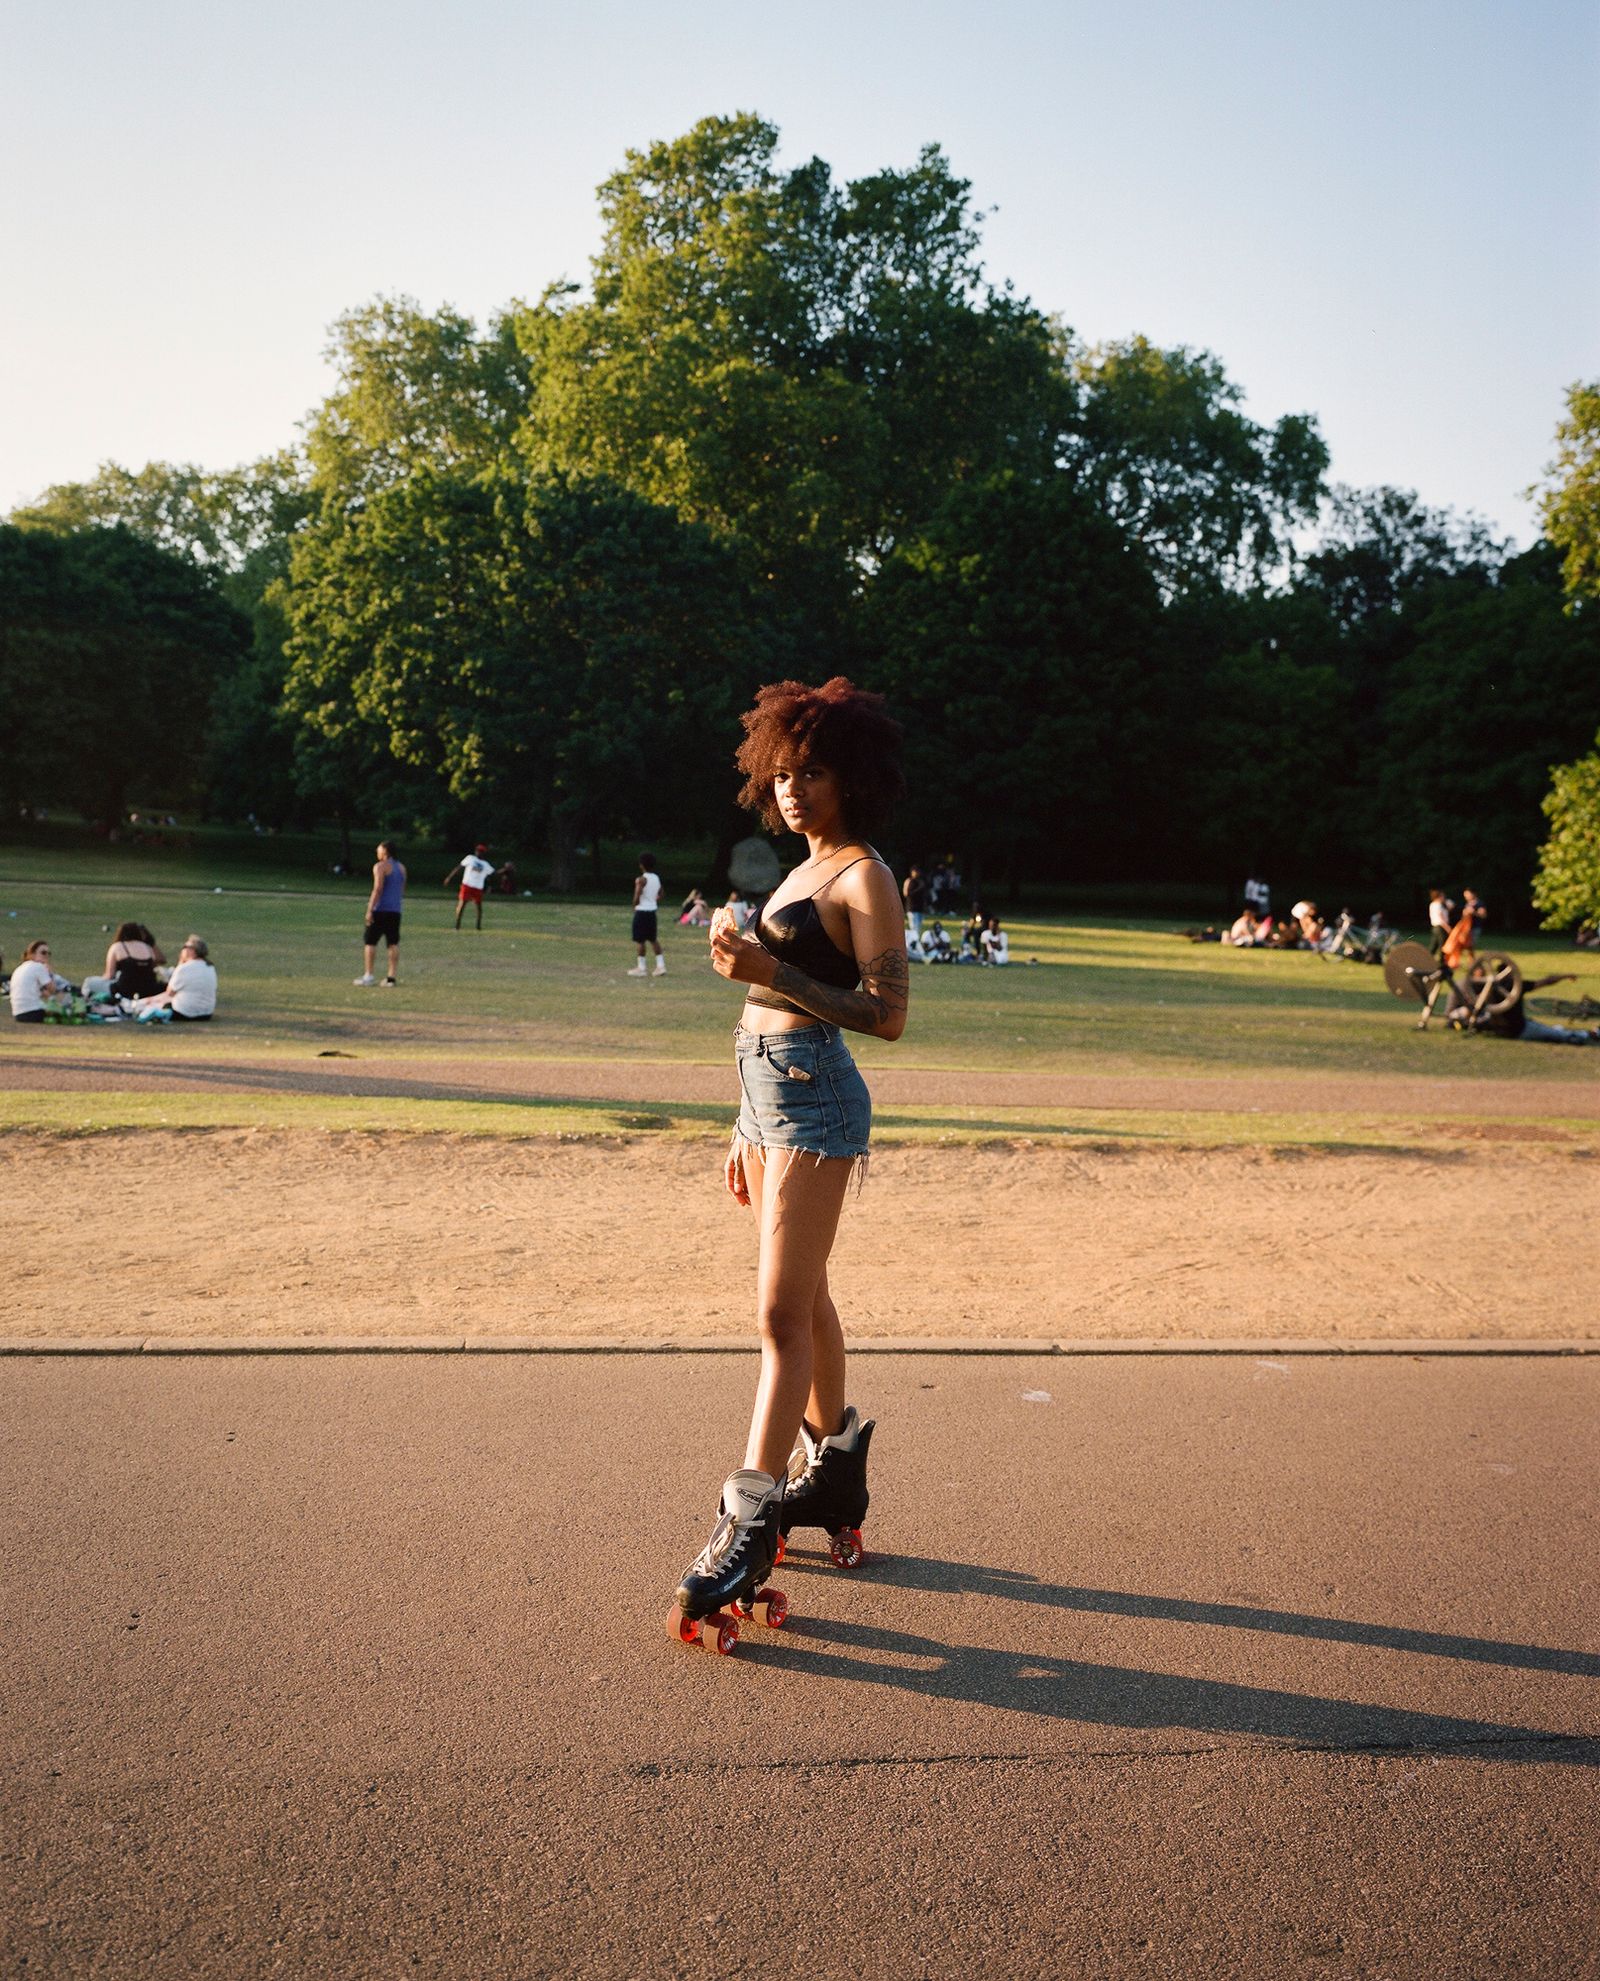 © alice zoo - Image from the Skaters photography project